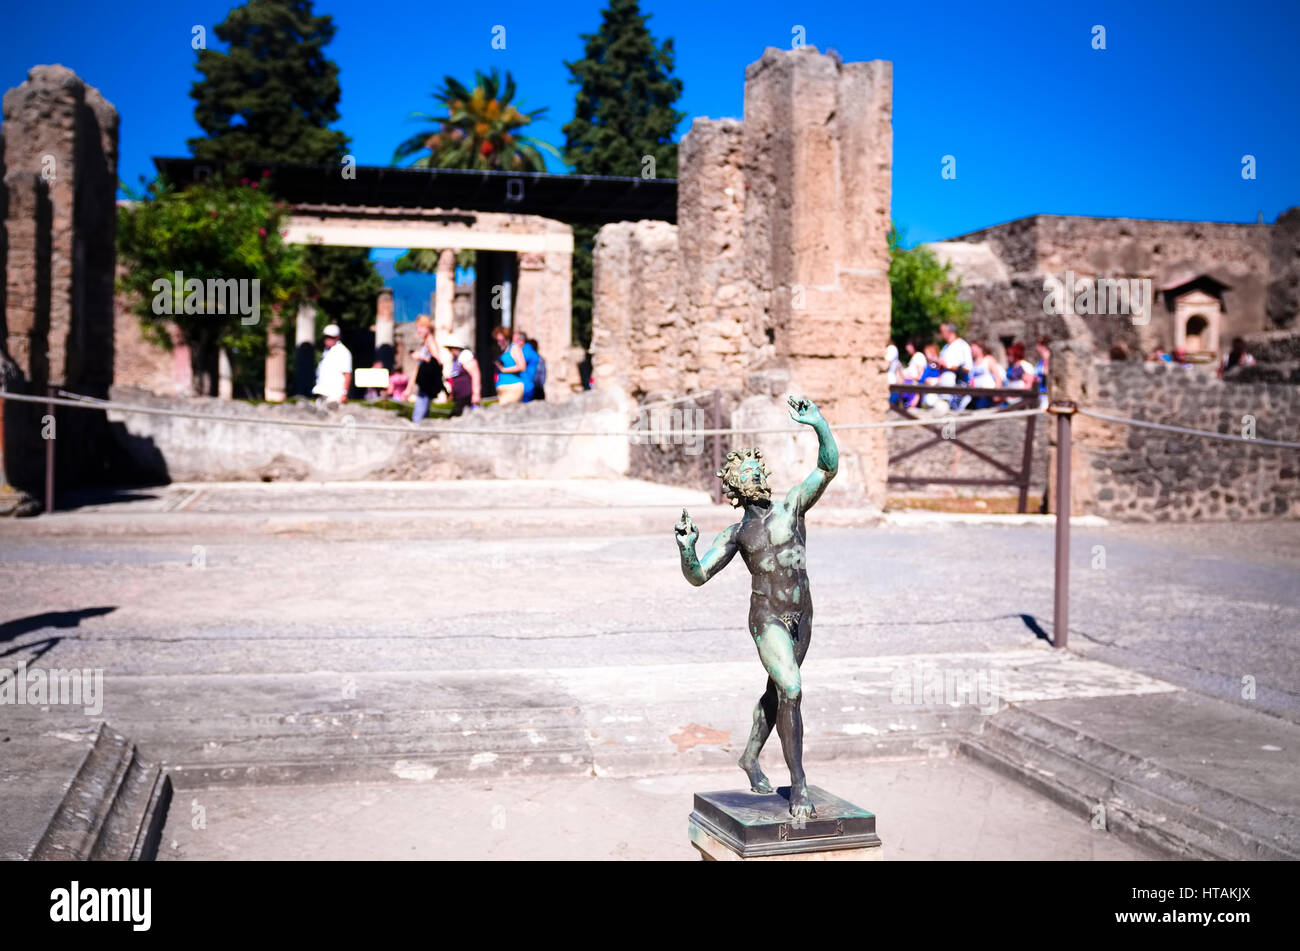 The House of the faun, Pompeii Ruins. Pompeii was destroyed, during a catastrophic eruption of the volcano Vesuvius spanning in AD 79. Stock Photo